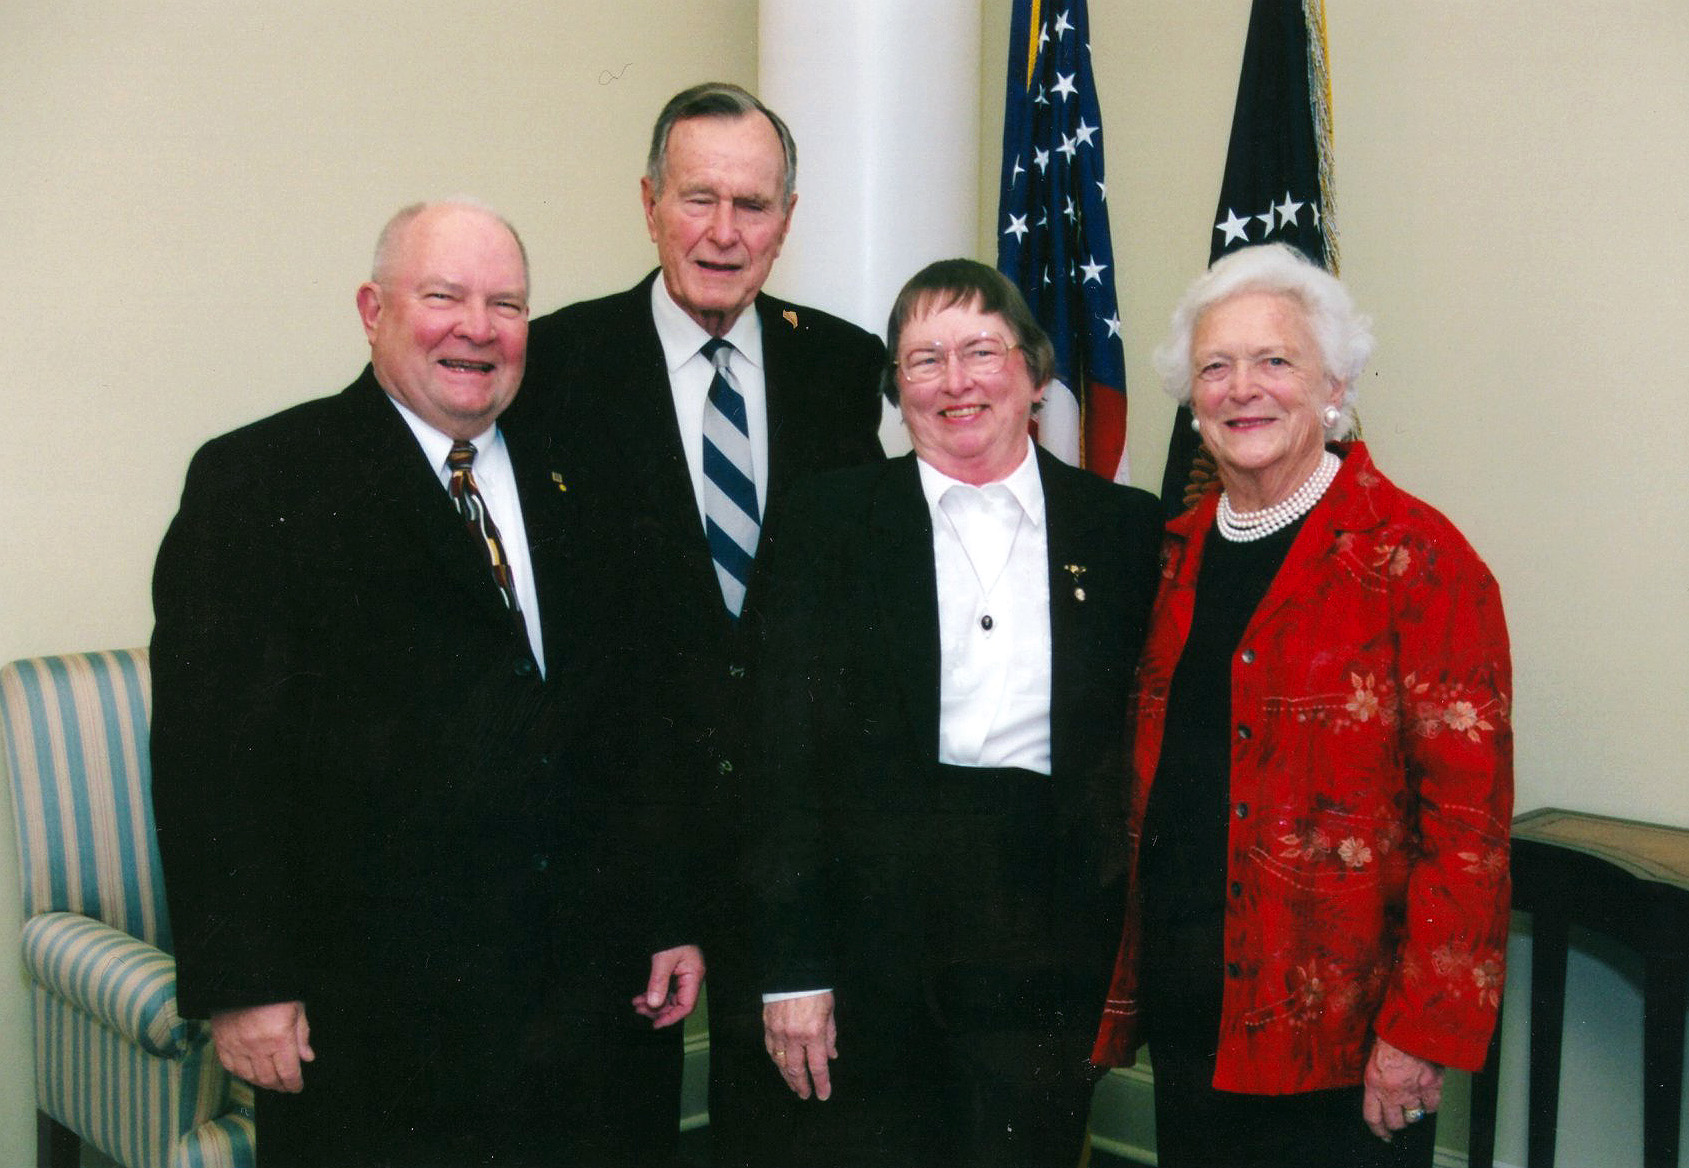 Texas A&amp;M chemist John Fackler and his wife Naomi pose with George and Barbara Bush at the November 6, 1997, dedication of his presidential library on the Texas A&amp;M University campus